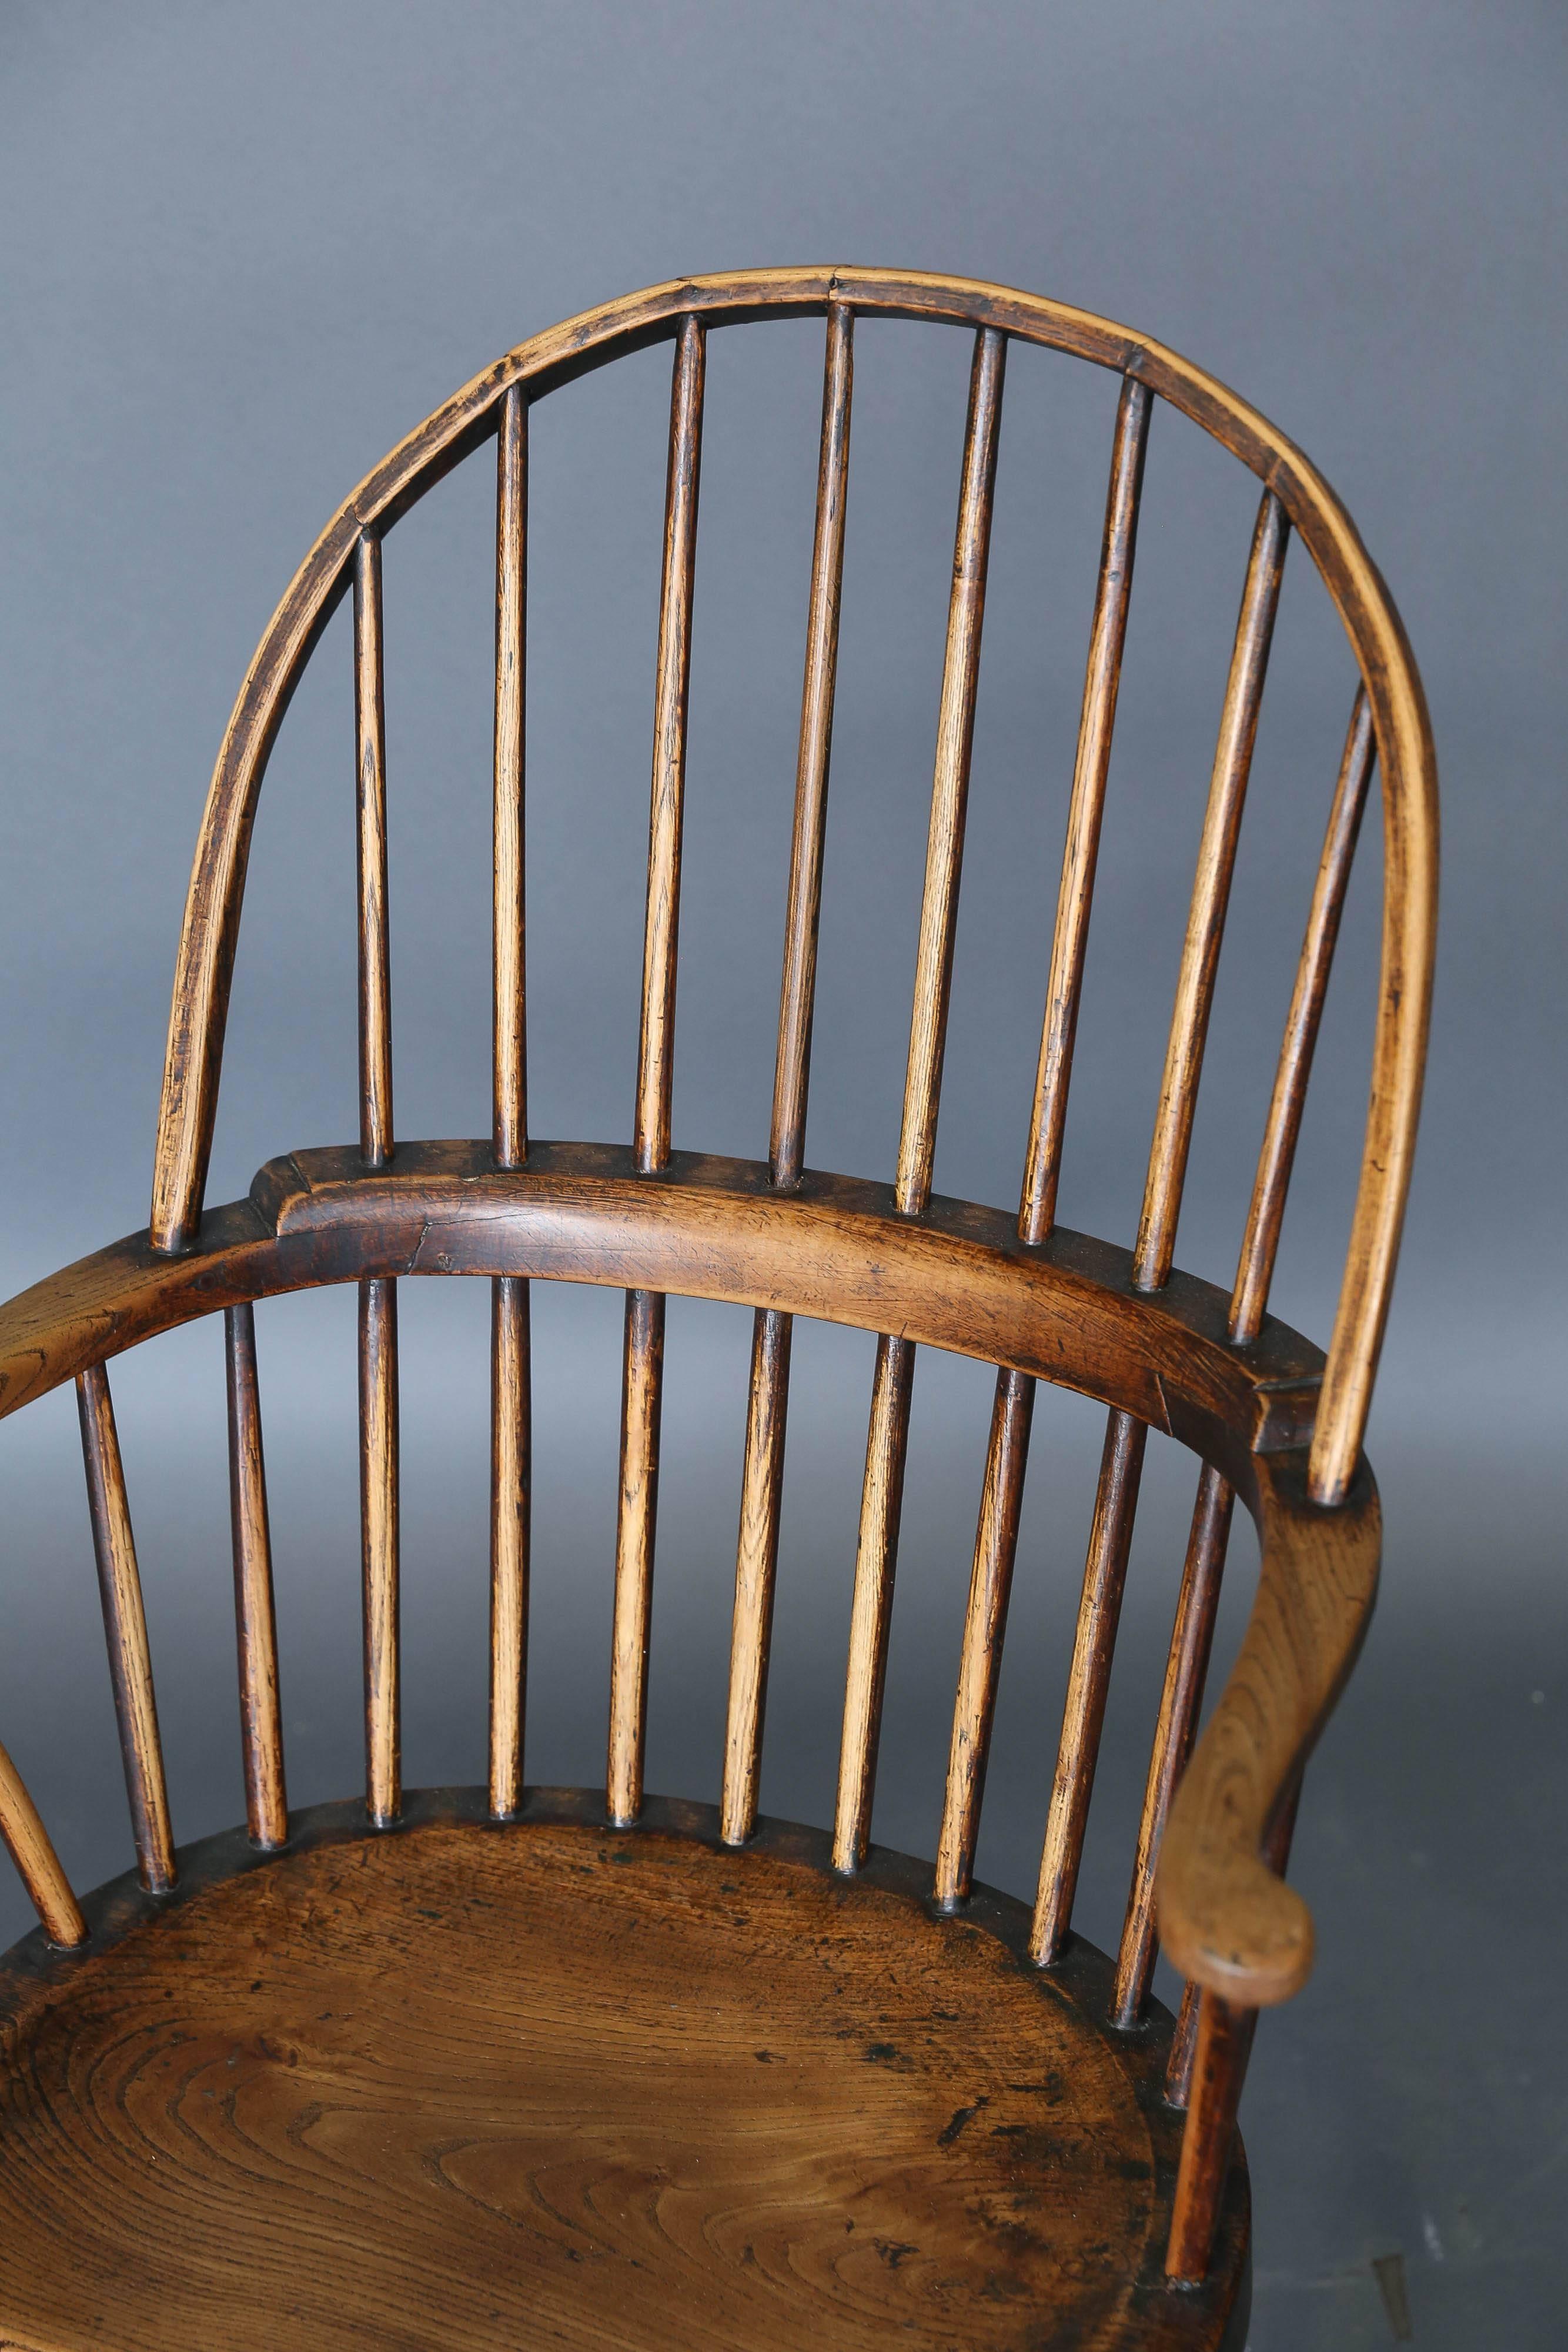 Antique 18th century ash and elm windsor chair from England with simple elongated bobbin stretchers. Comfortable and elegant. Worn appropriately where hands were placed.